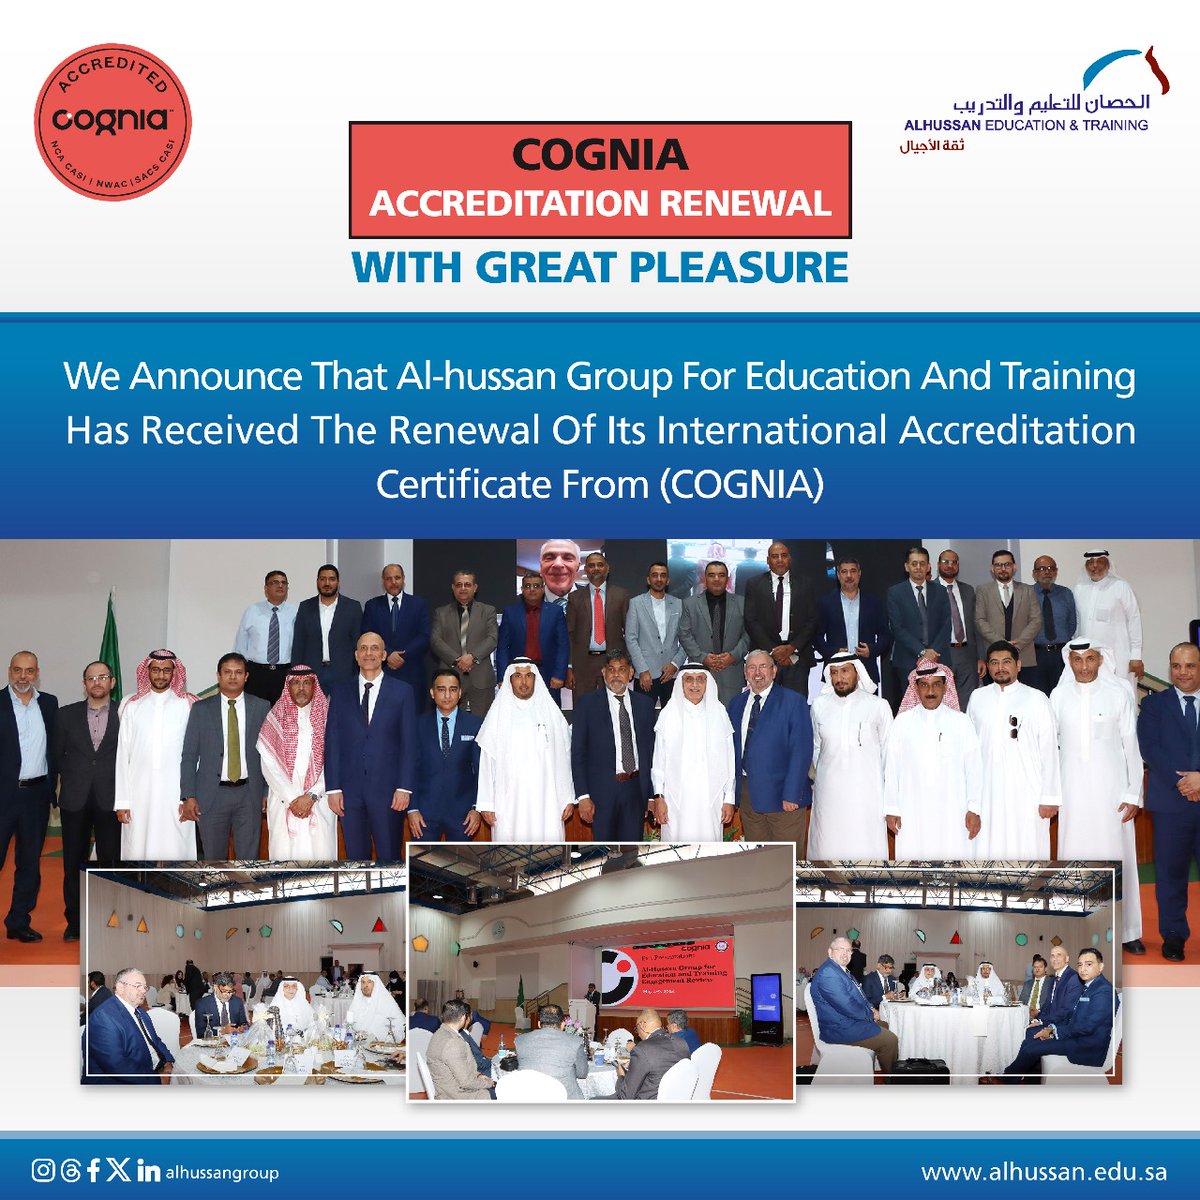 Cognia Accreditation Renewal
With great pleasure, we announce that Al-Hussan Group for Education and Training has received the renewal of its international accreditation certificate from Cognia following a review team's visit to assess the group's operations and performance.
Mr.